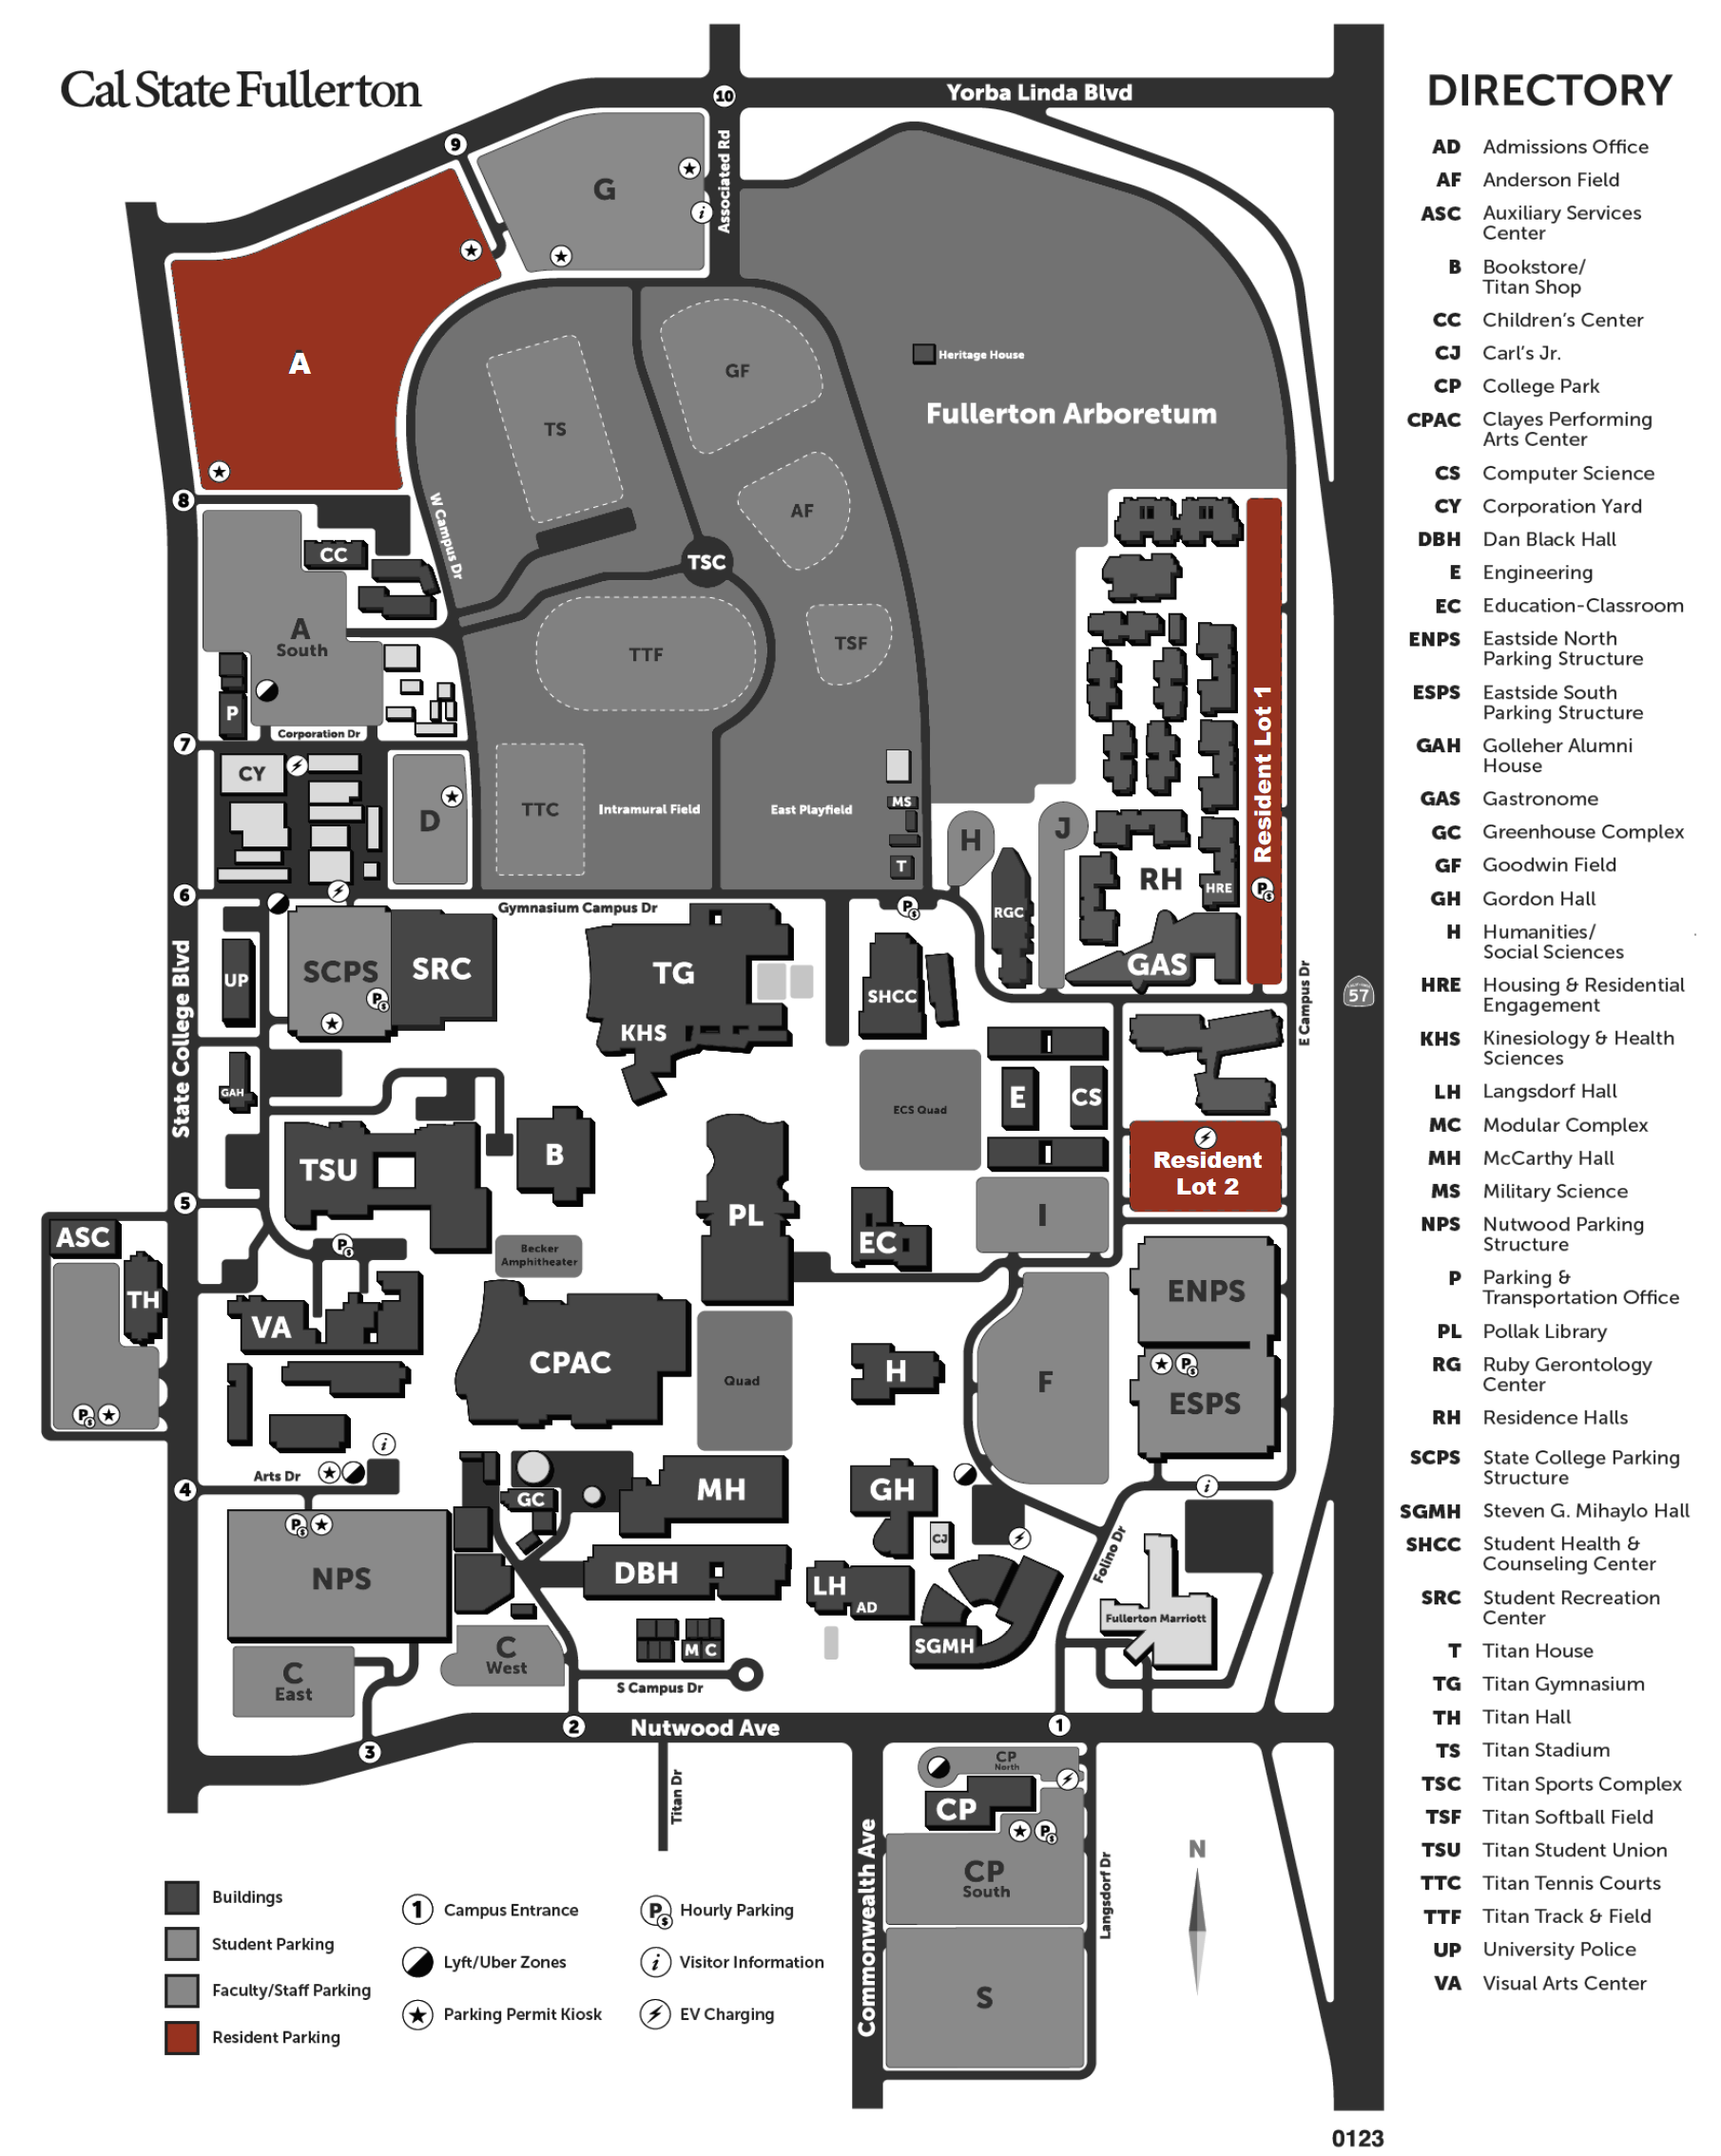 Resident Parking Map